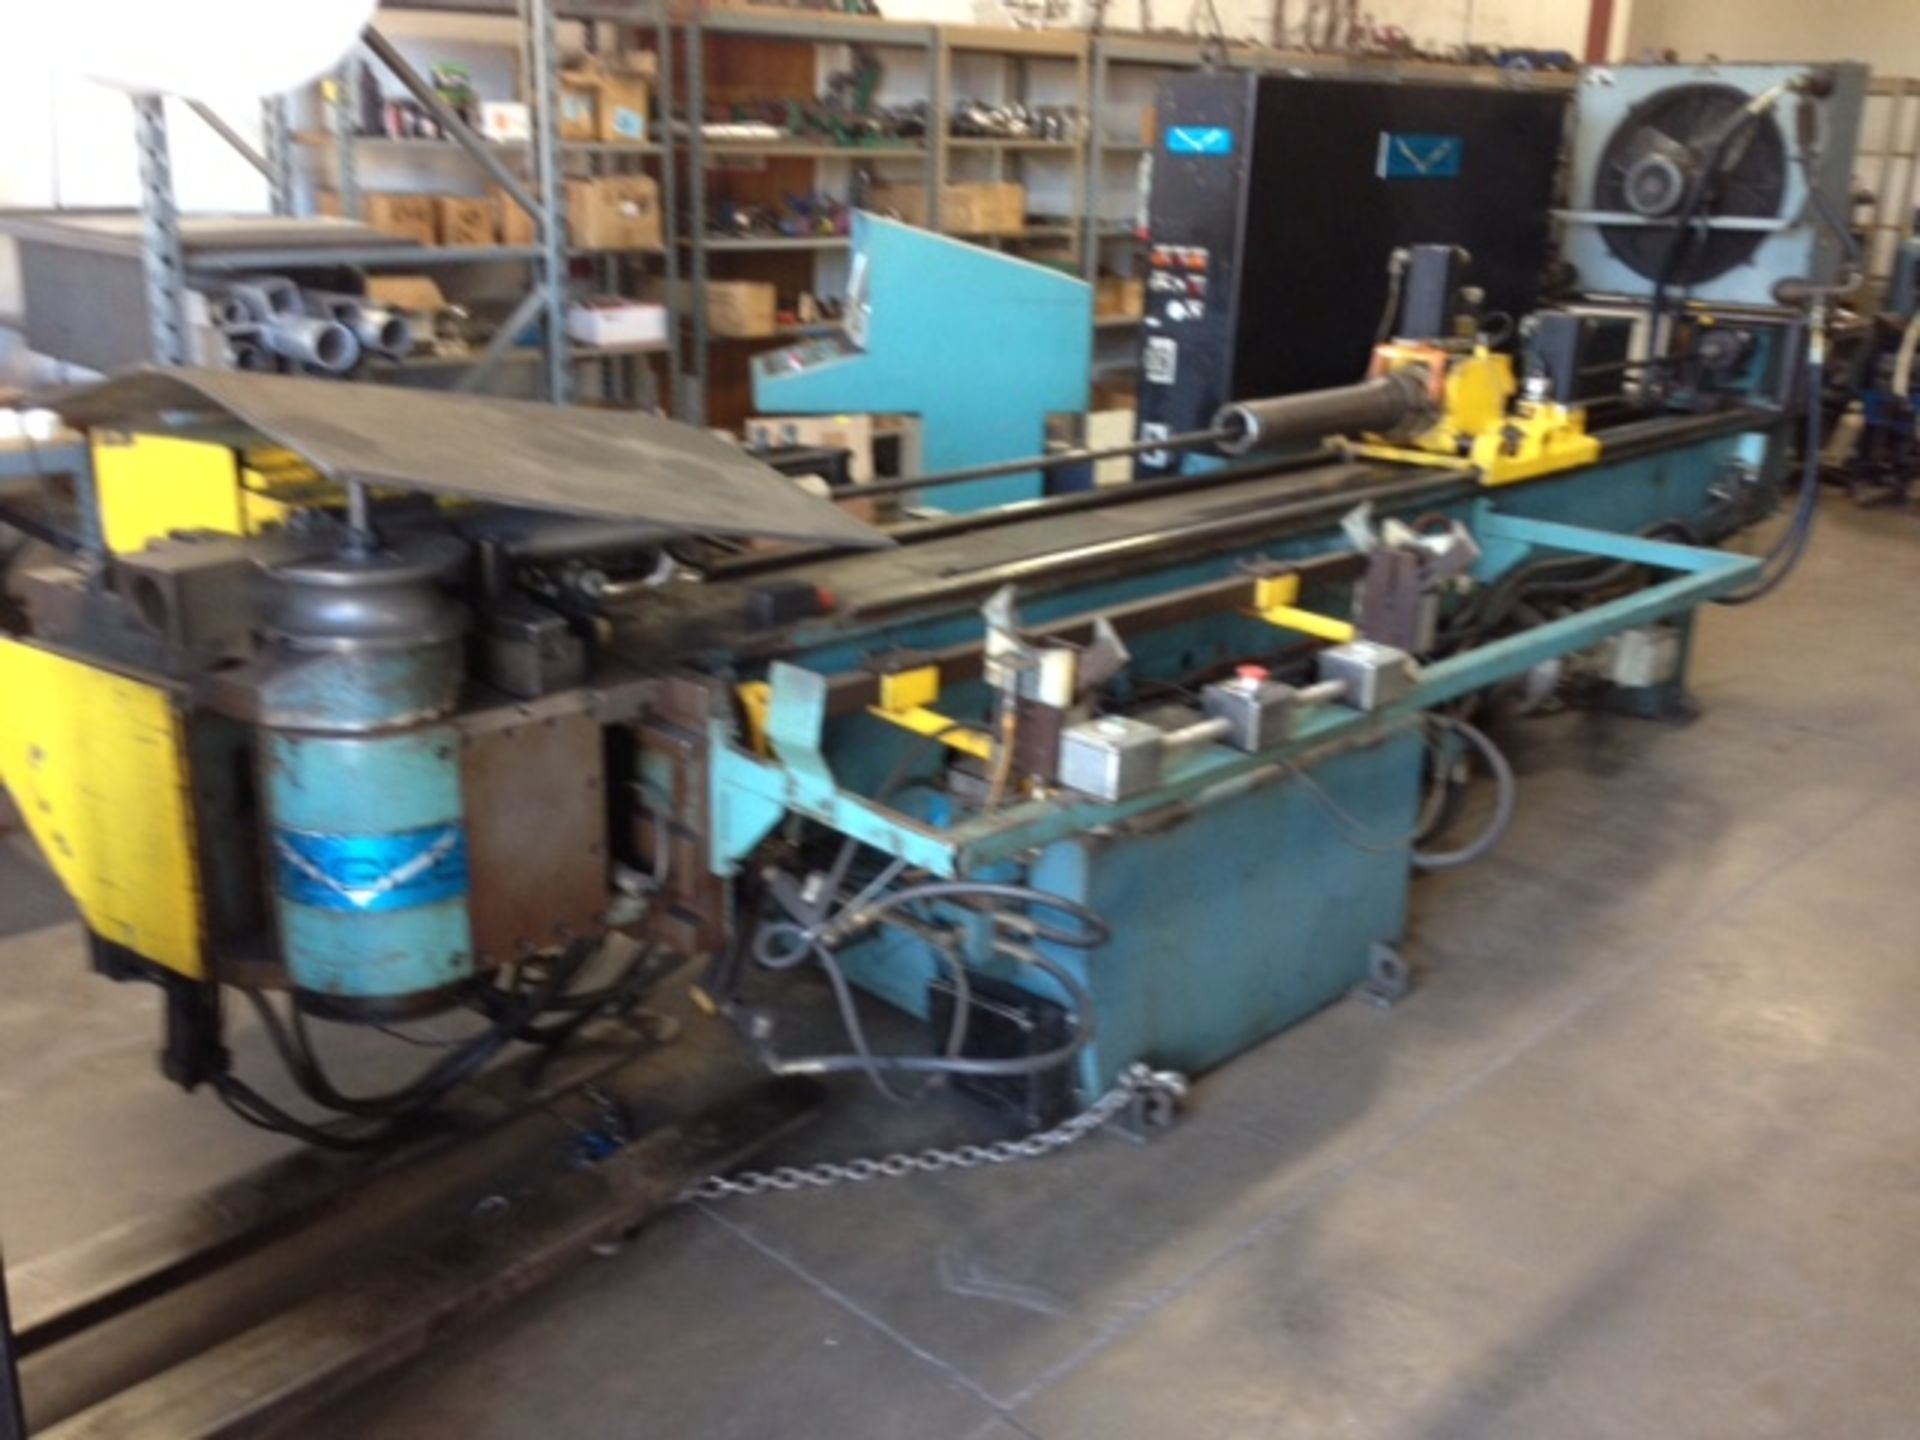 EAGLE MDL. EPT 75, 3" CNC TUBE BENDER, SN. 91652  LOCATED AT: C & M